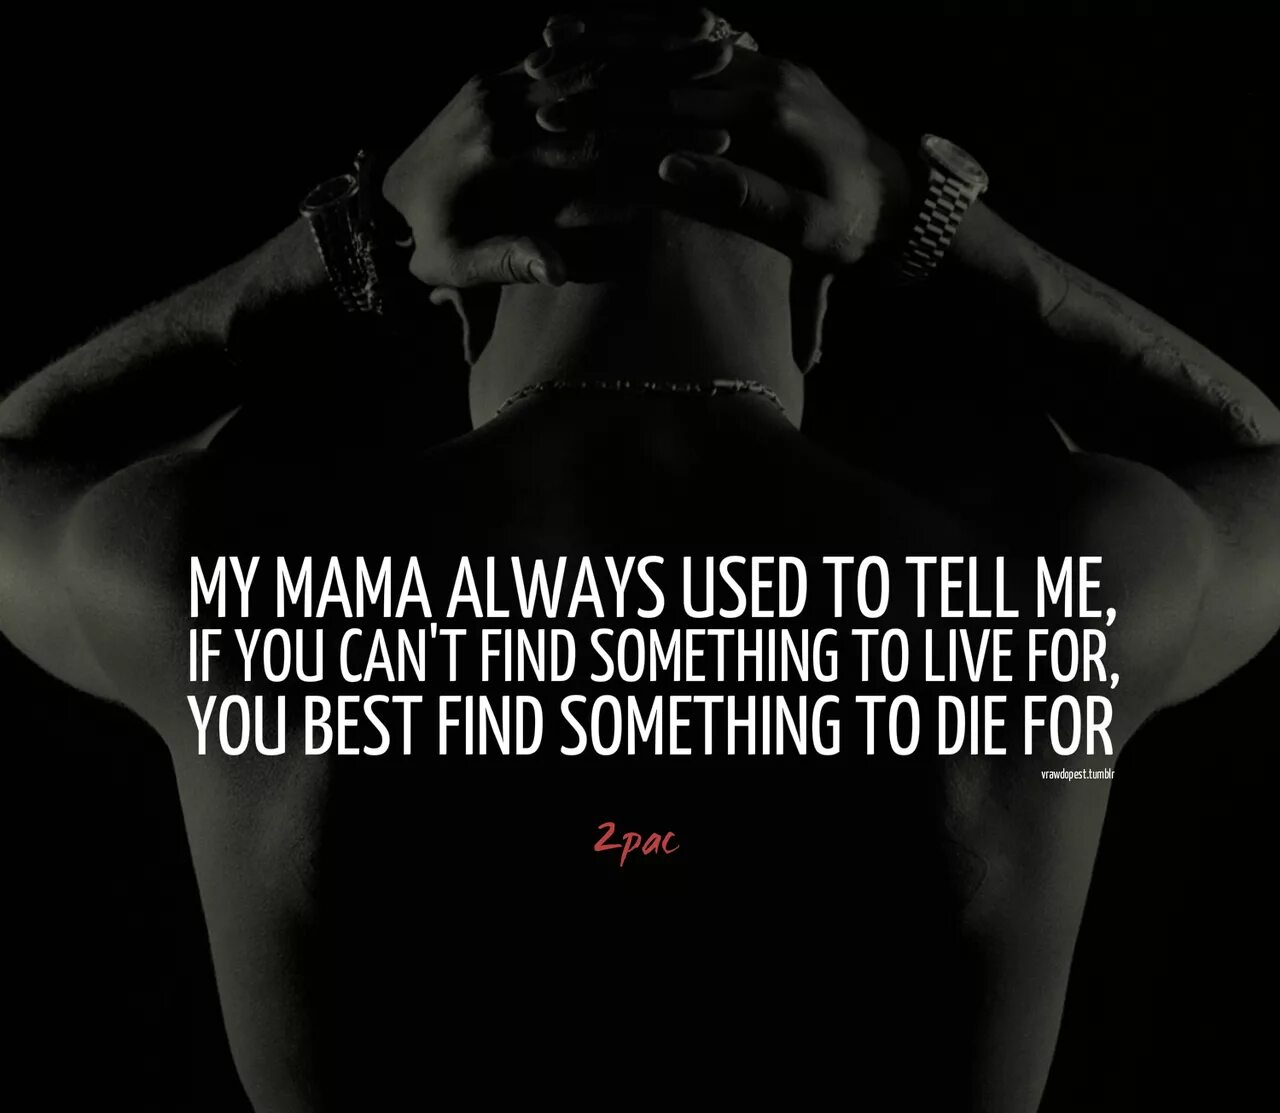 Something died. 2pac цитаты. Used to always. Find something. Something to Live for.